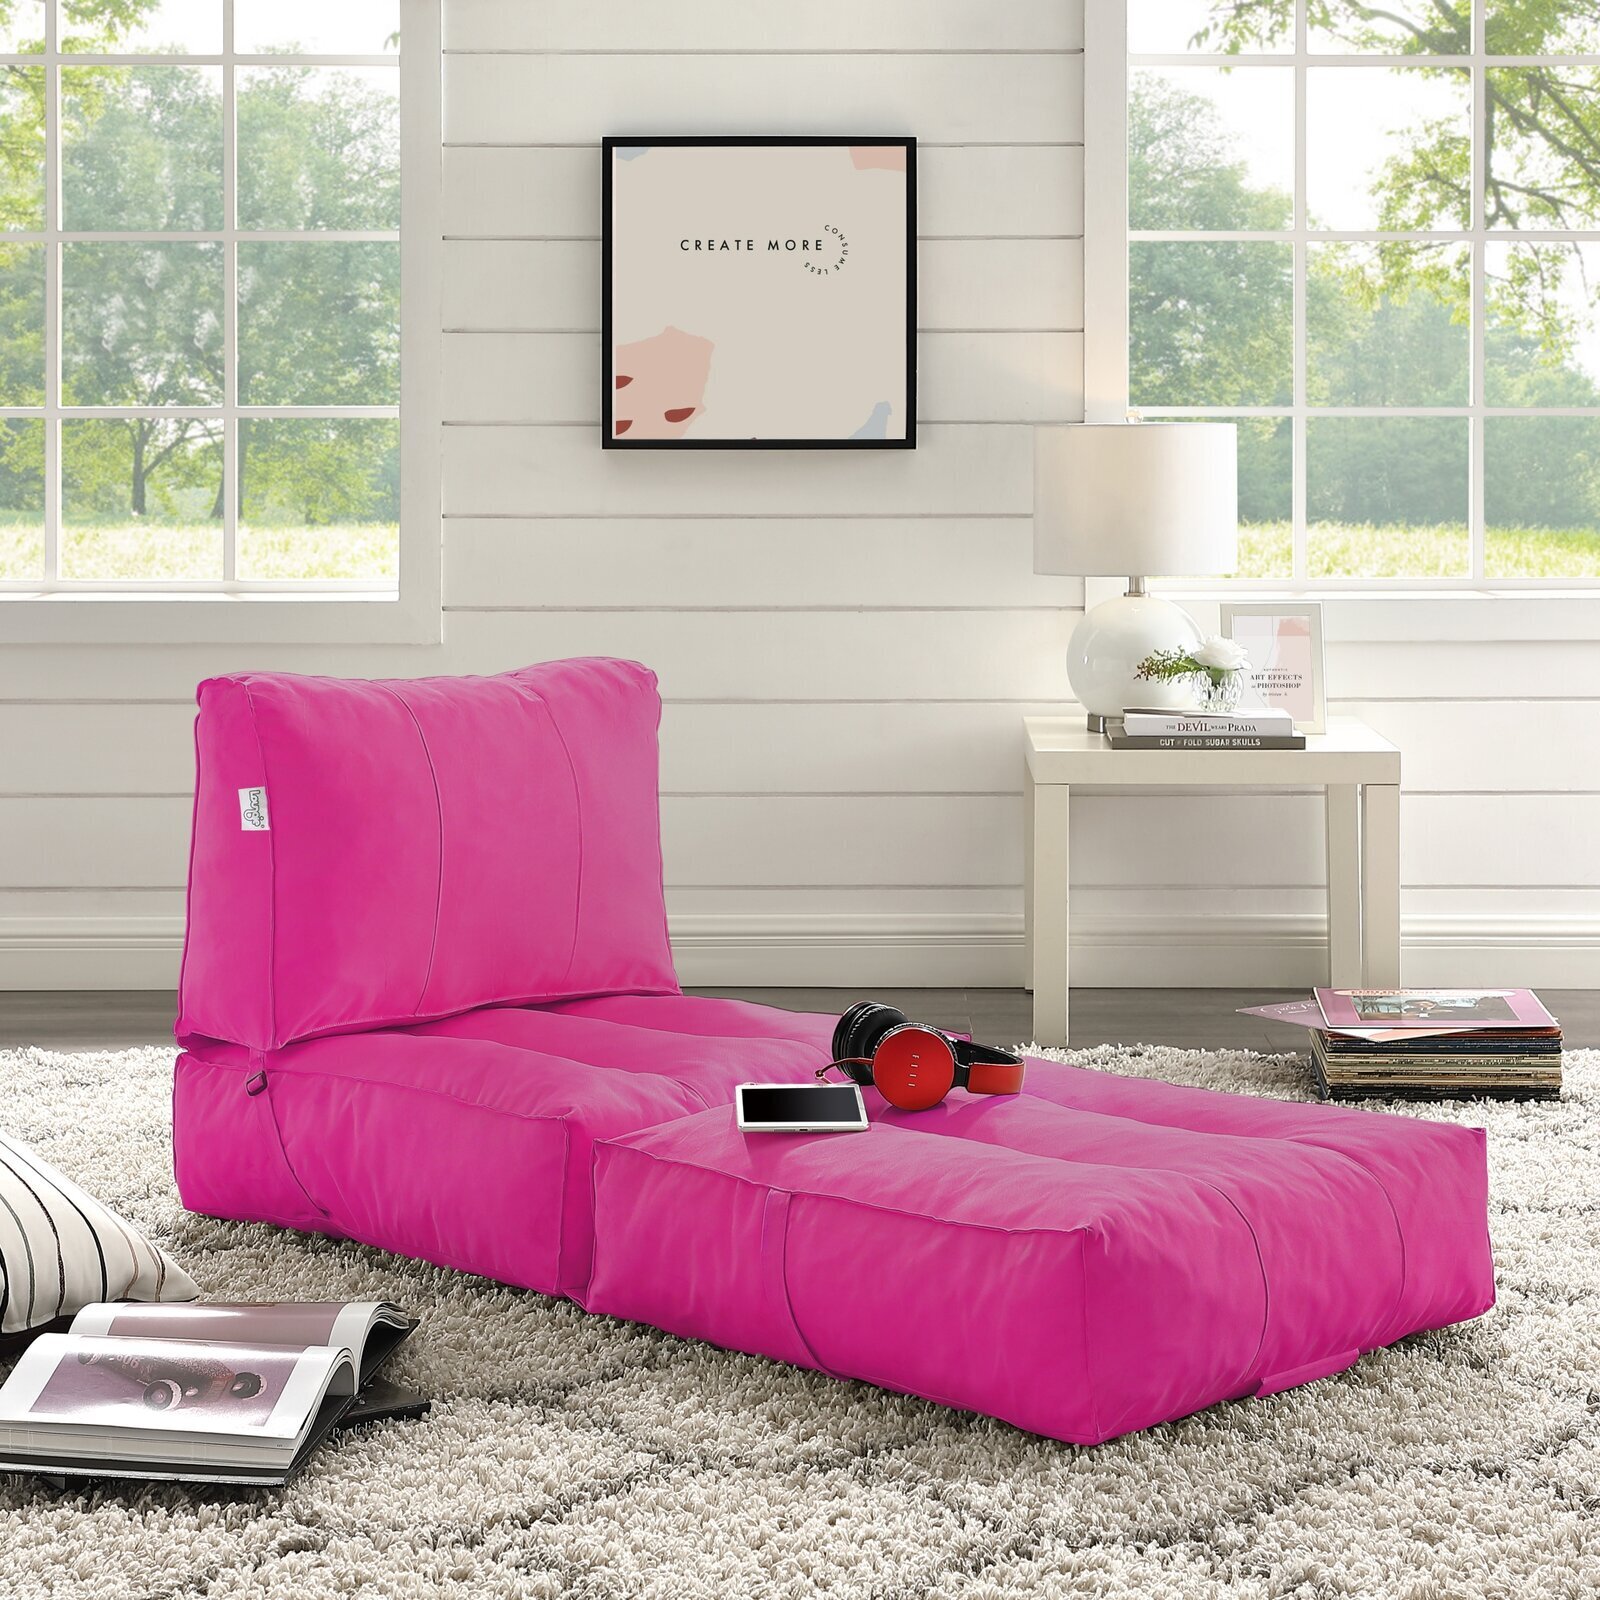 Soft Pink FUR BEANBAG Cover Soft Bedroom Luxury Polo Bean Bag Lounge Movie Chair 